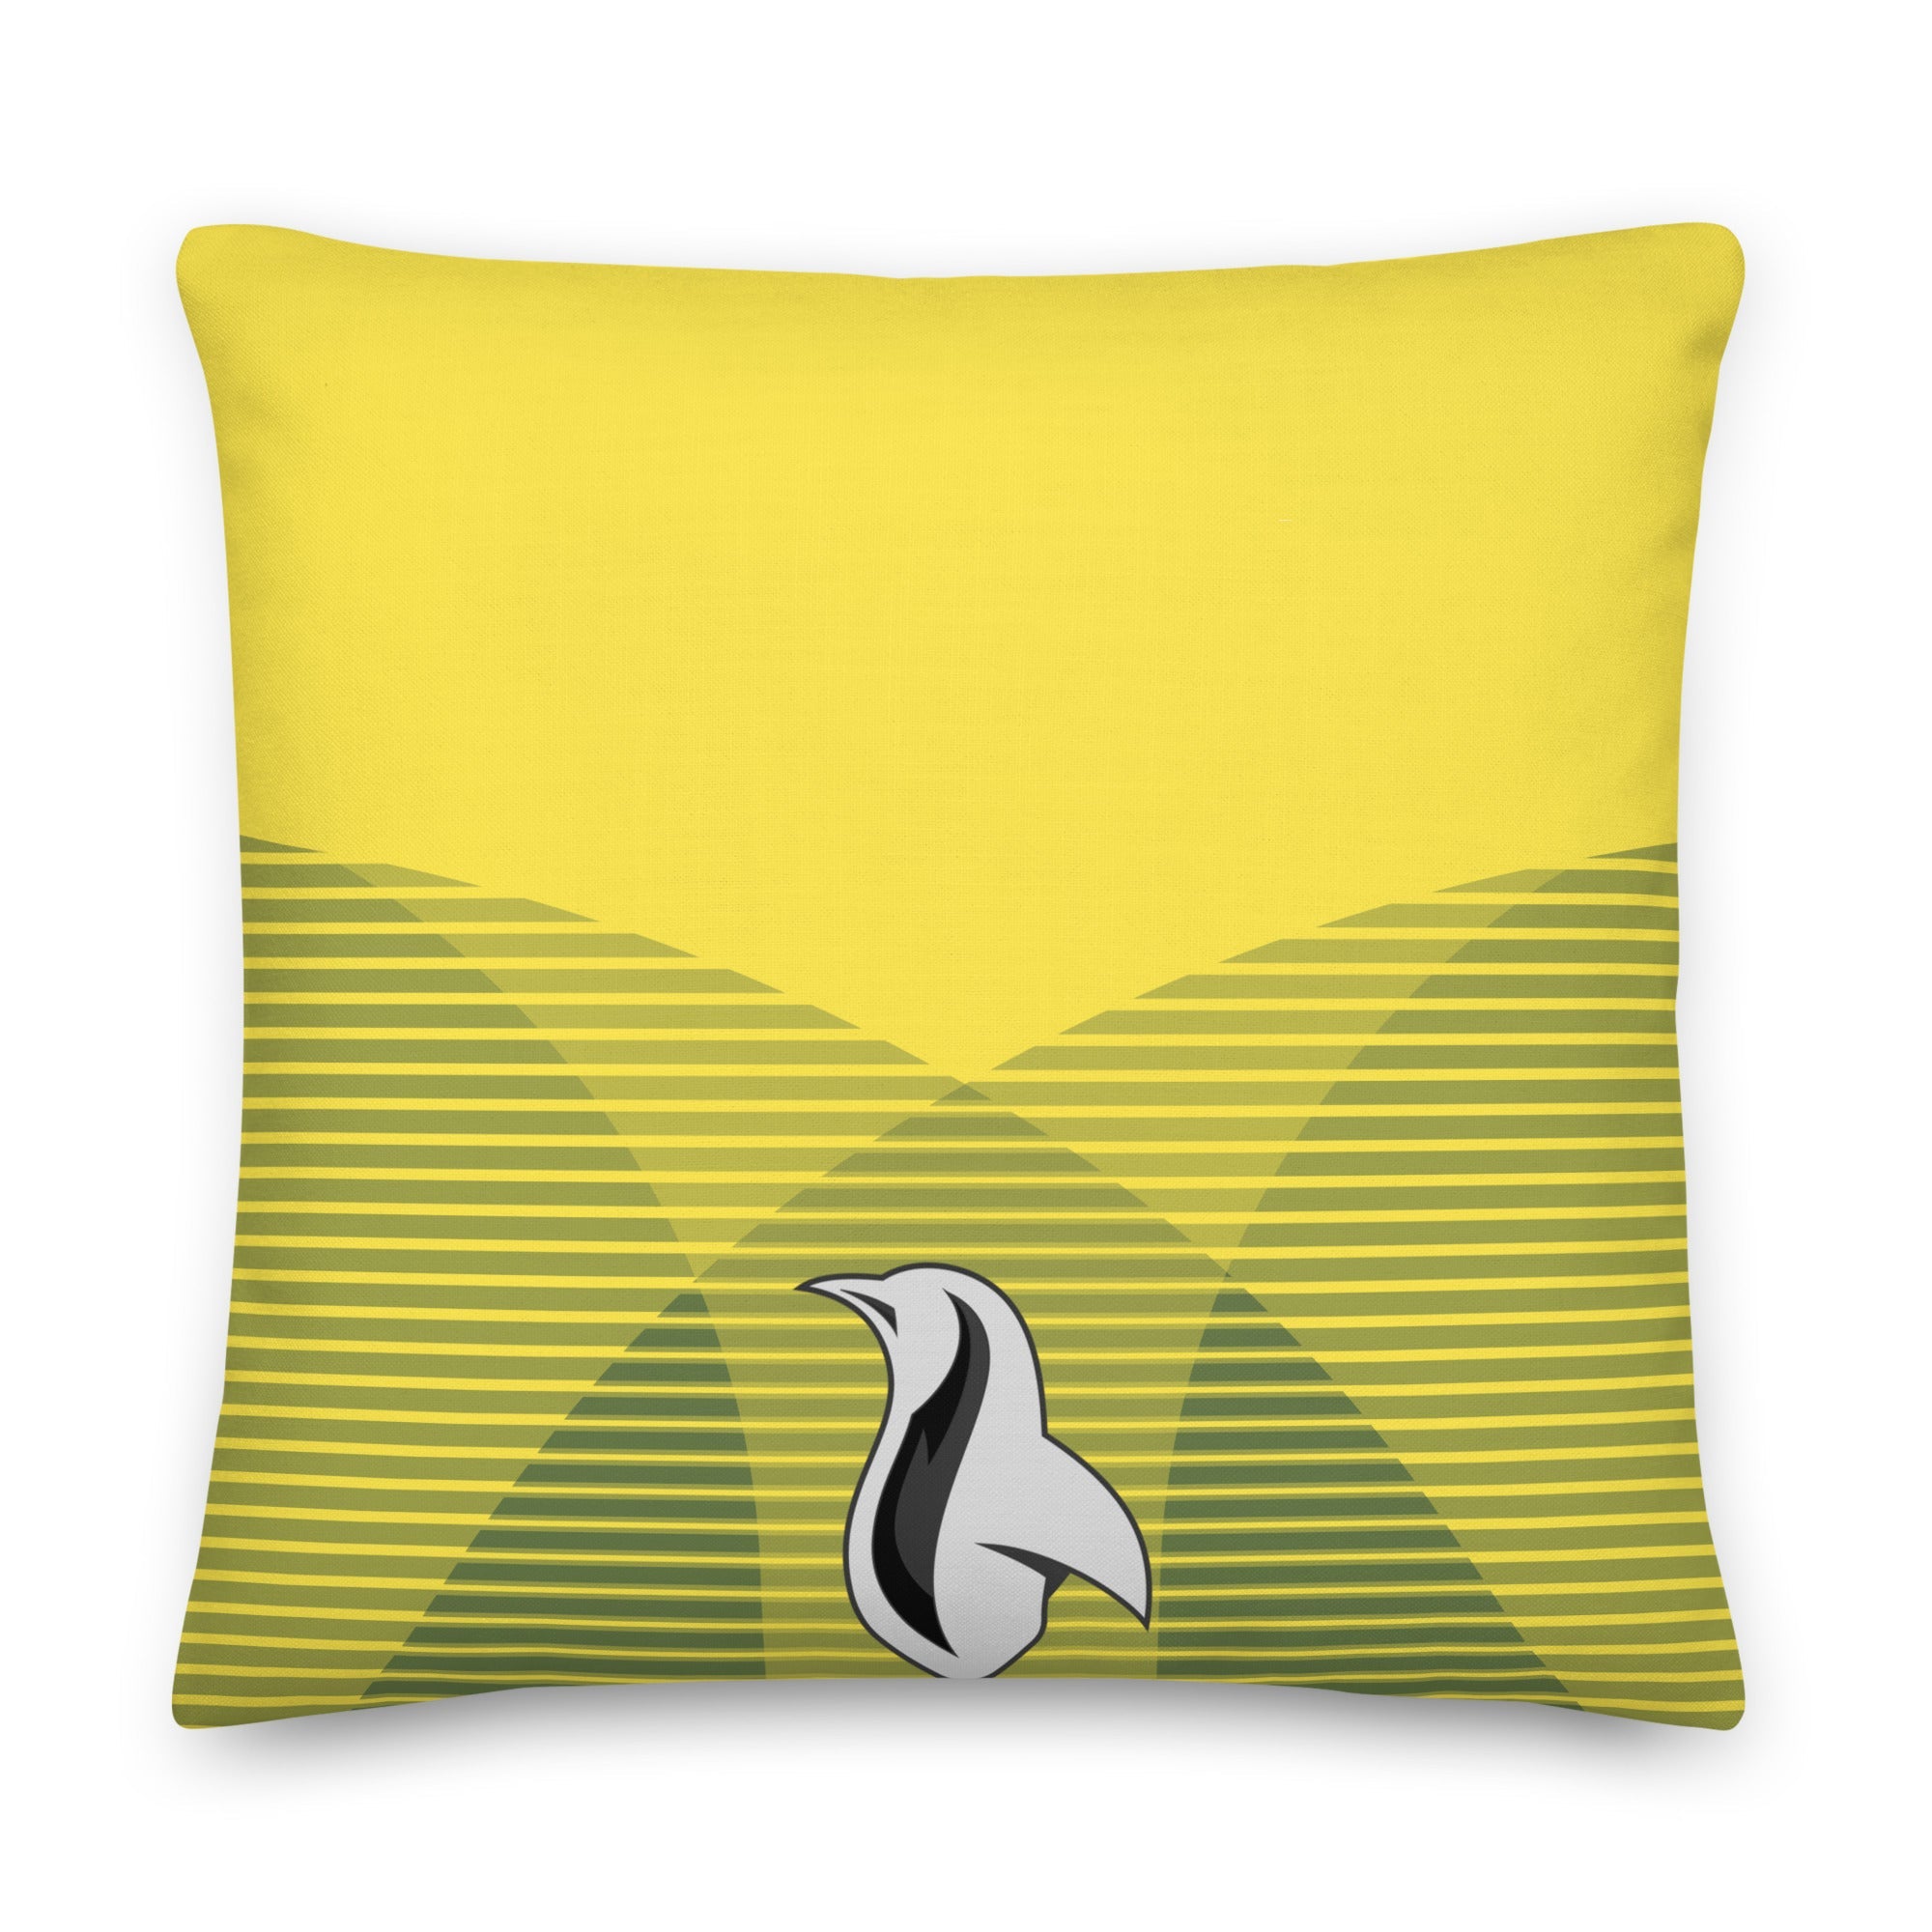 yellow pillow with a funny mushroom